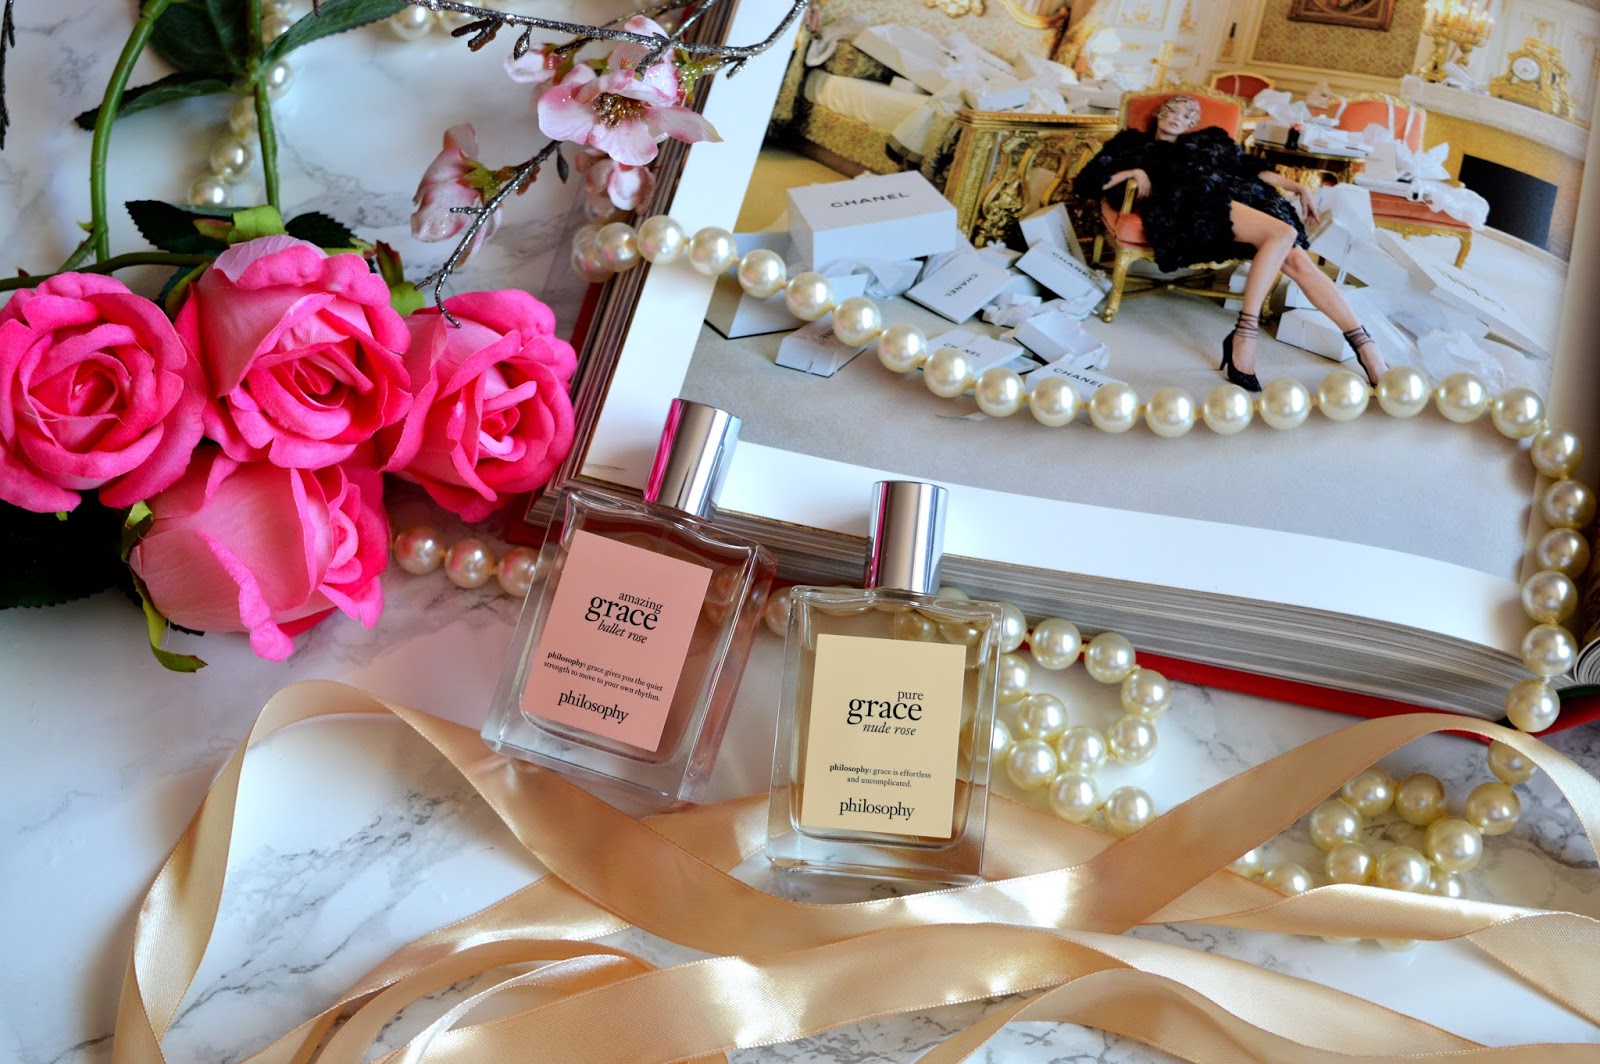 Philosophy Pure Grace Nude Rose Collection